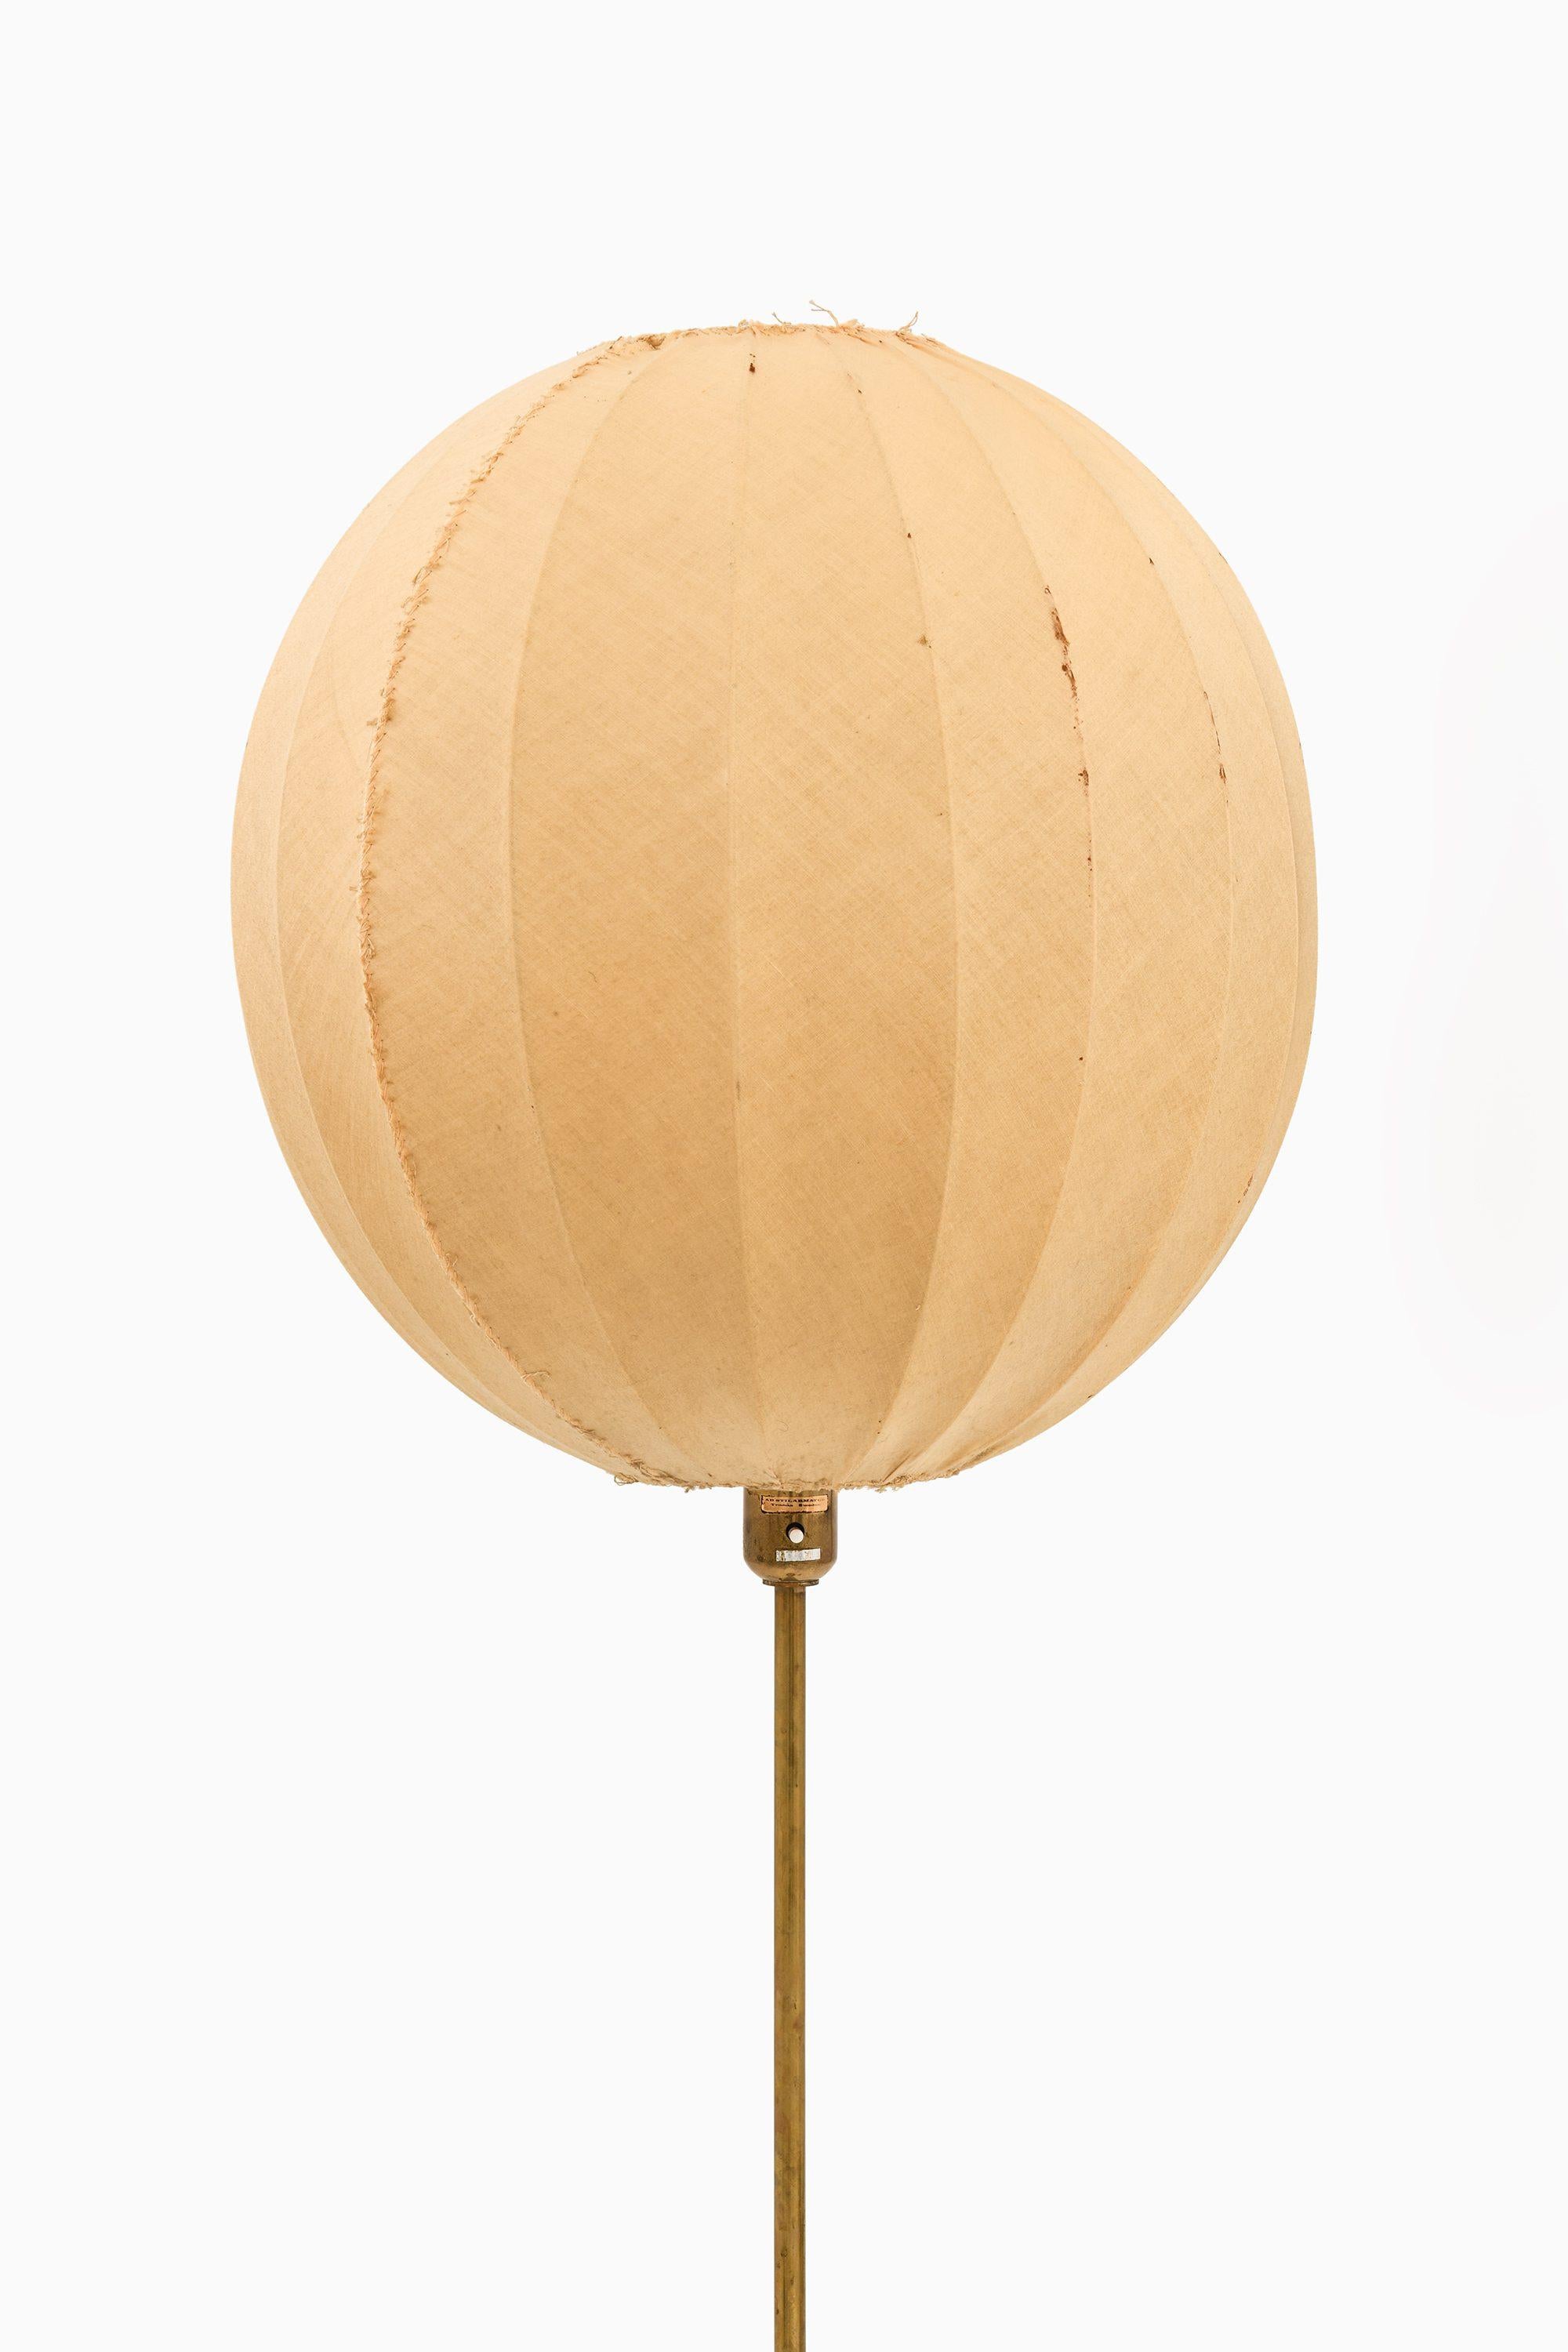 Rare Floor Lamp in Brass and Fabric Shade, 1950’s

Additional Information:
Material: Brass and fabric shade
Style: Mid century, Scandinavia
Produced by AB Stilarmatur in Tranås, Sweden
Dimensions (W x D x H): 48 x 48 x 172 cm
Condition: Good vintage